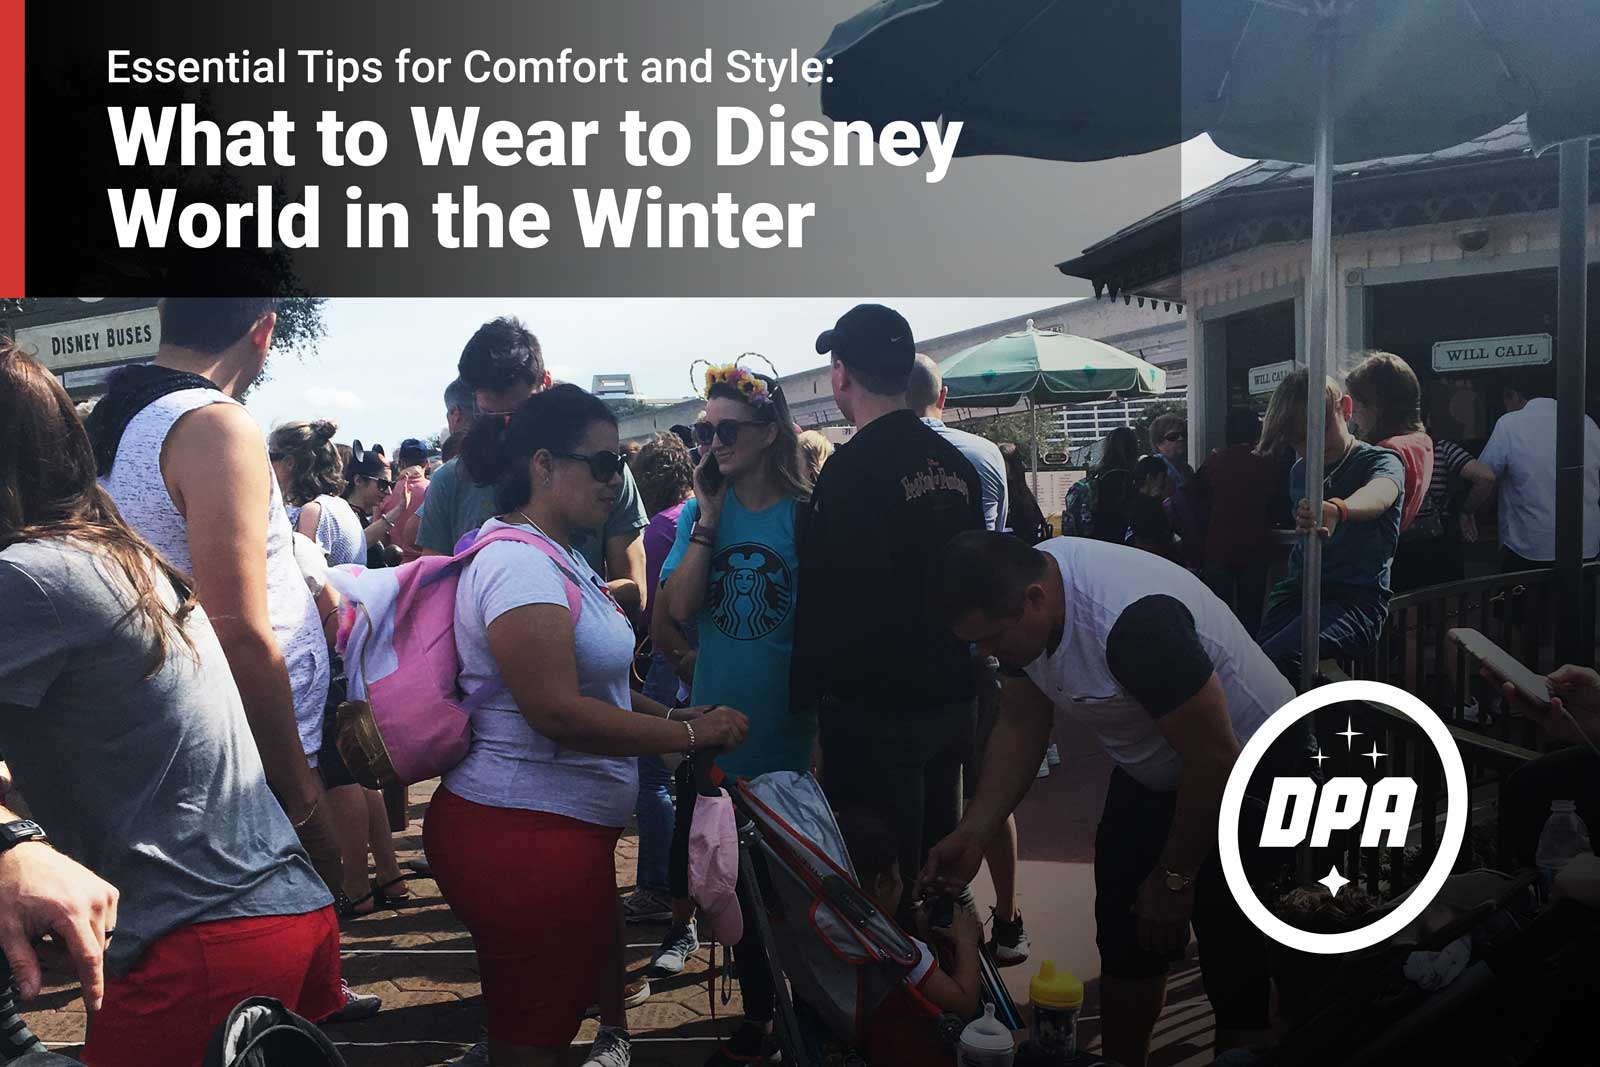 What to Wear to Disney World in the Winter